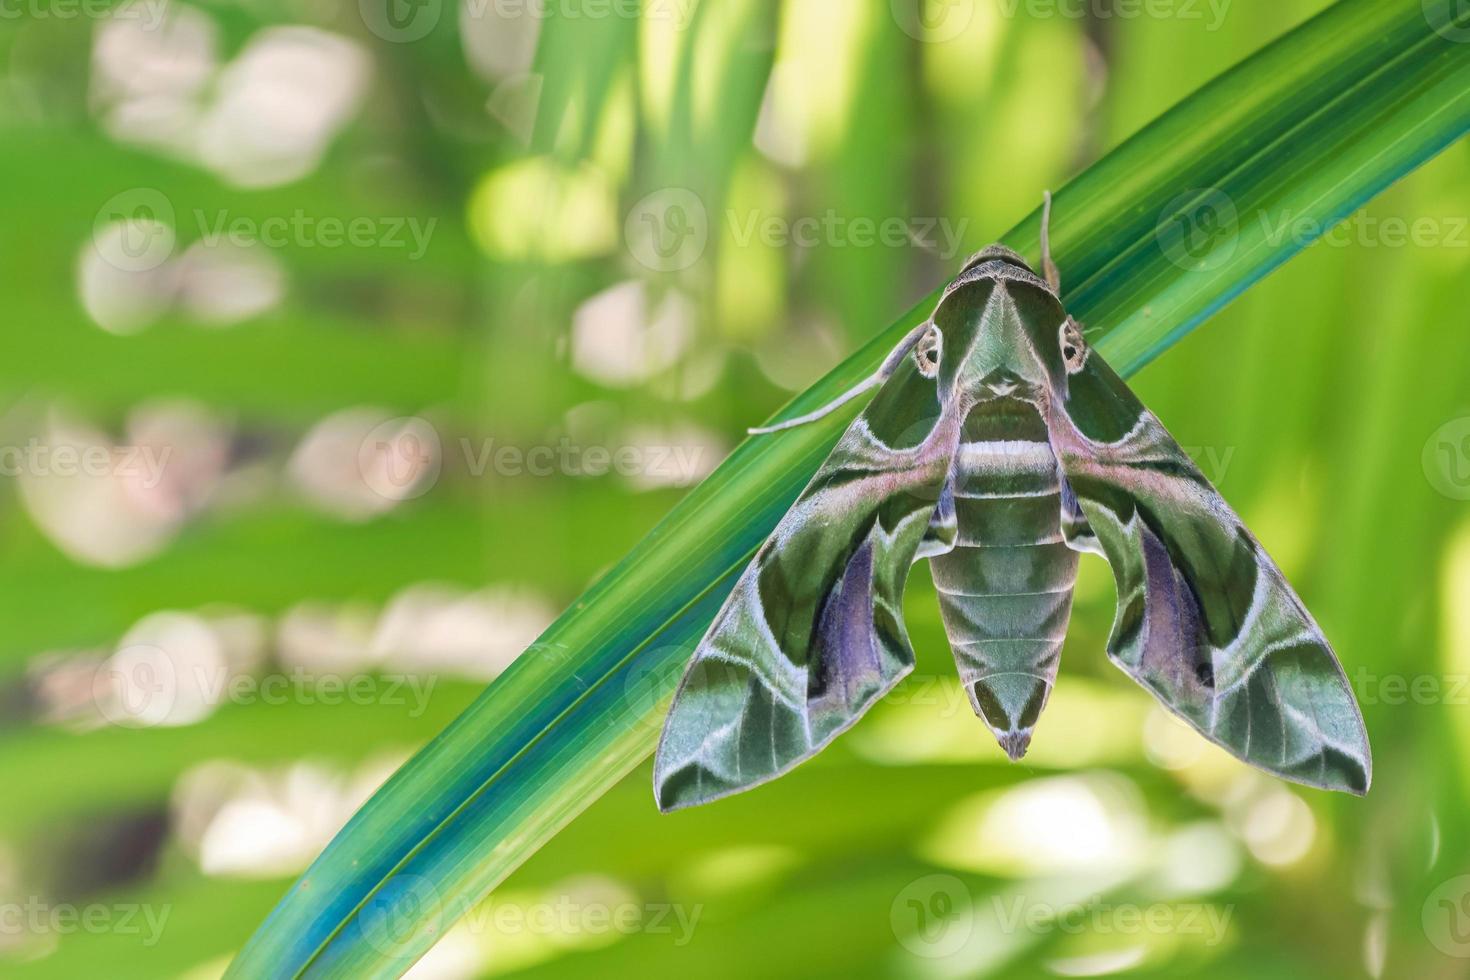 small night green butterfly the leaf,and blurred background green nature in rainy seaso, Oleander hawkmoth Daphnis nerii photo